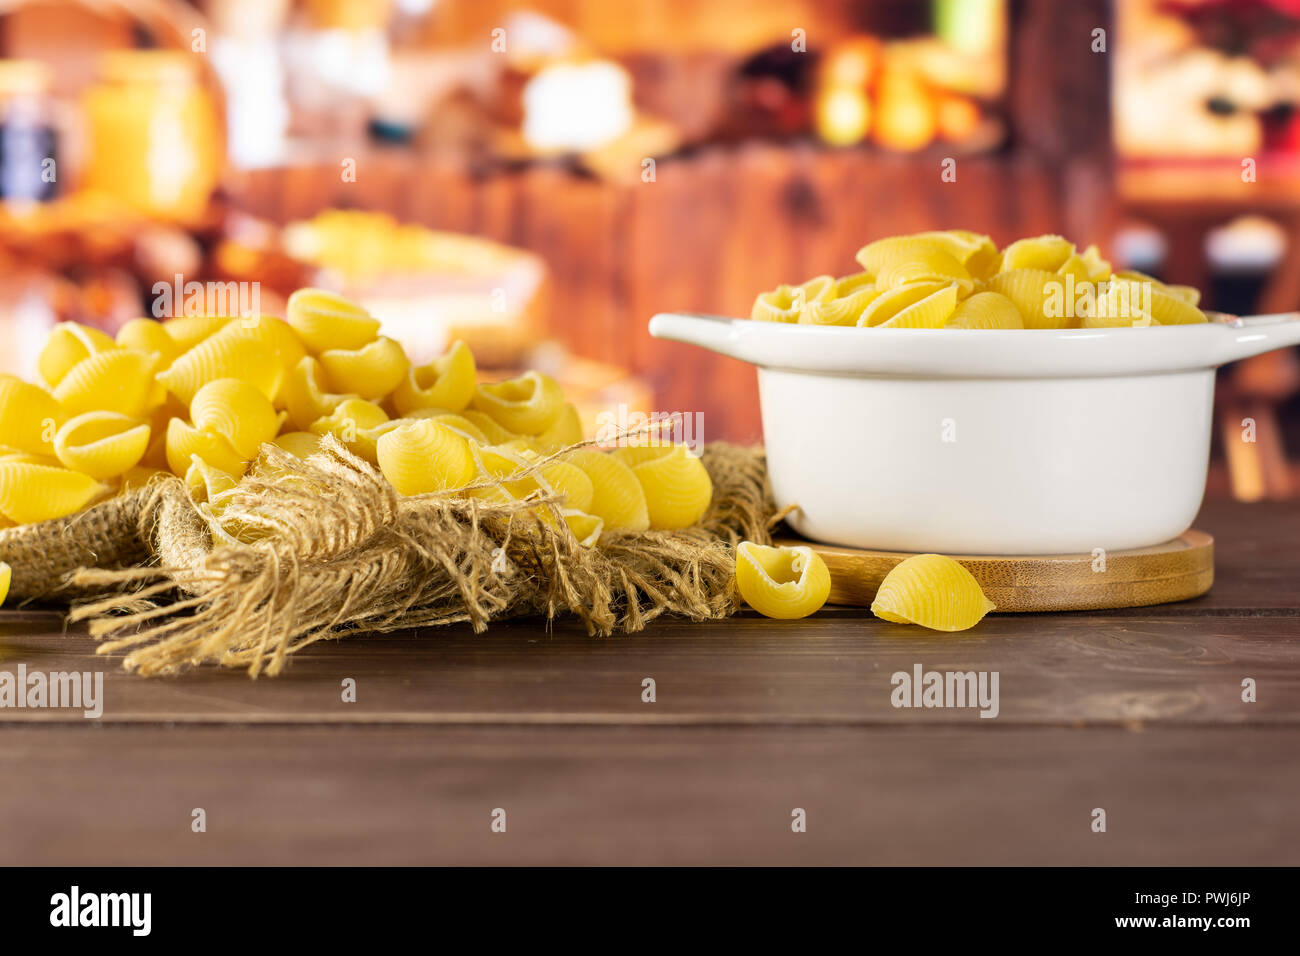 Lot of whole raw yellow pasta conchiglie variety on jute cloth in a ceramic stewpan with rustic wood kitchen in background Stock Photo